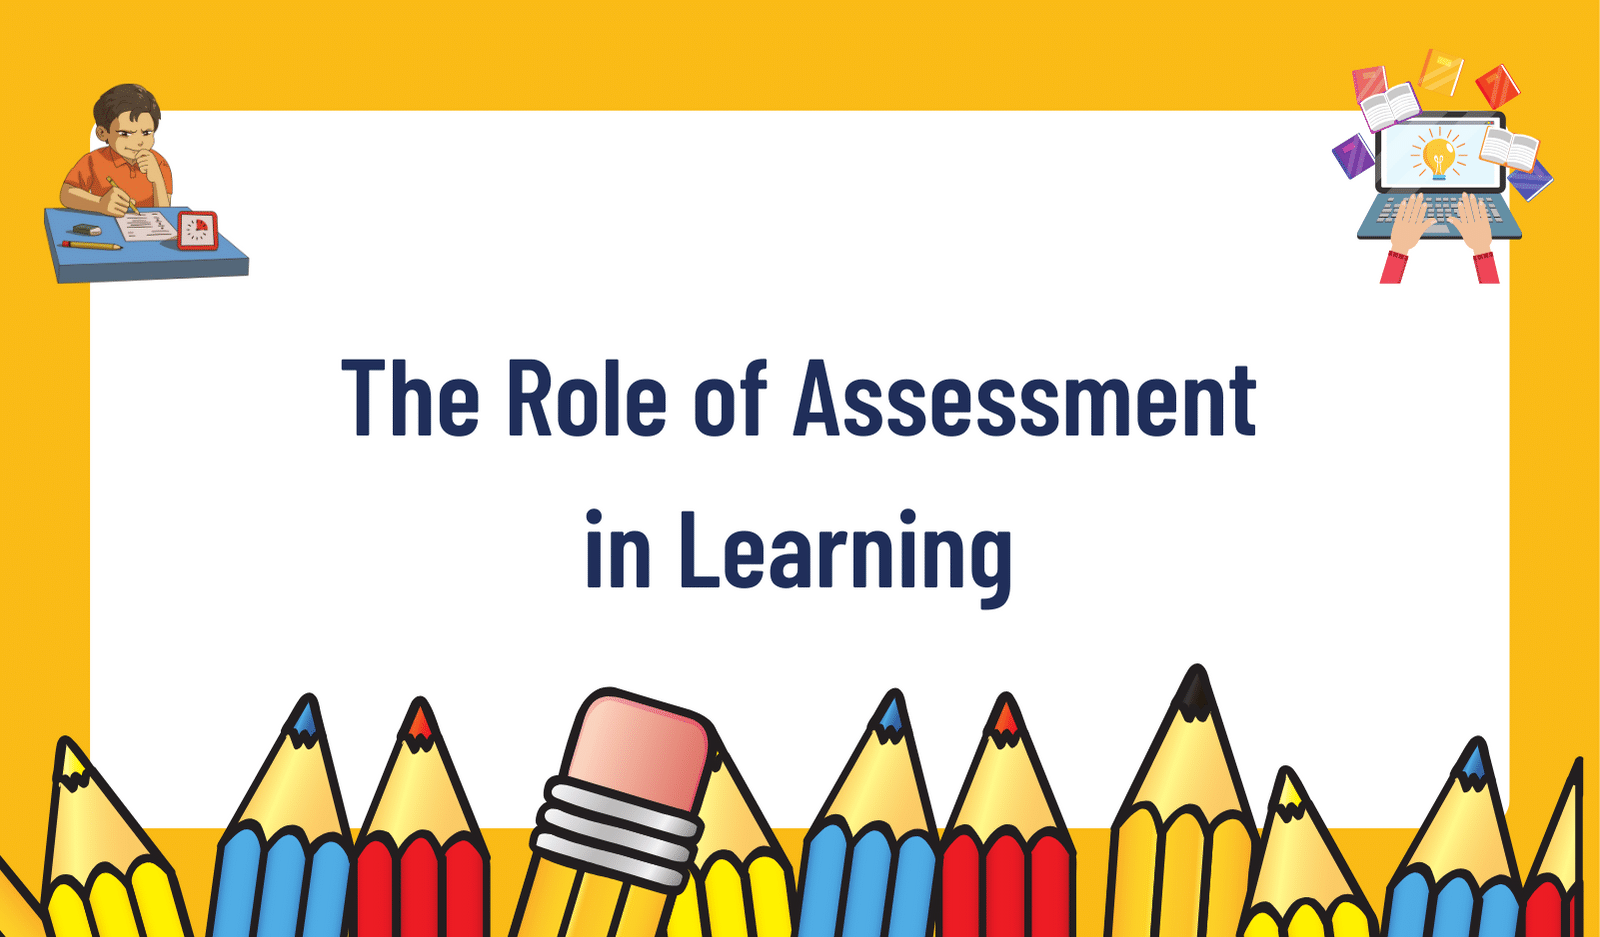 The role of assessment in learning